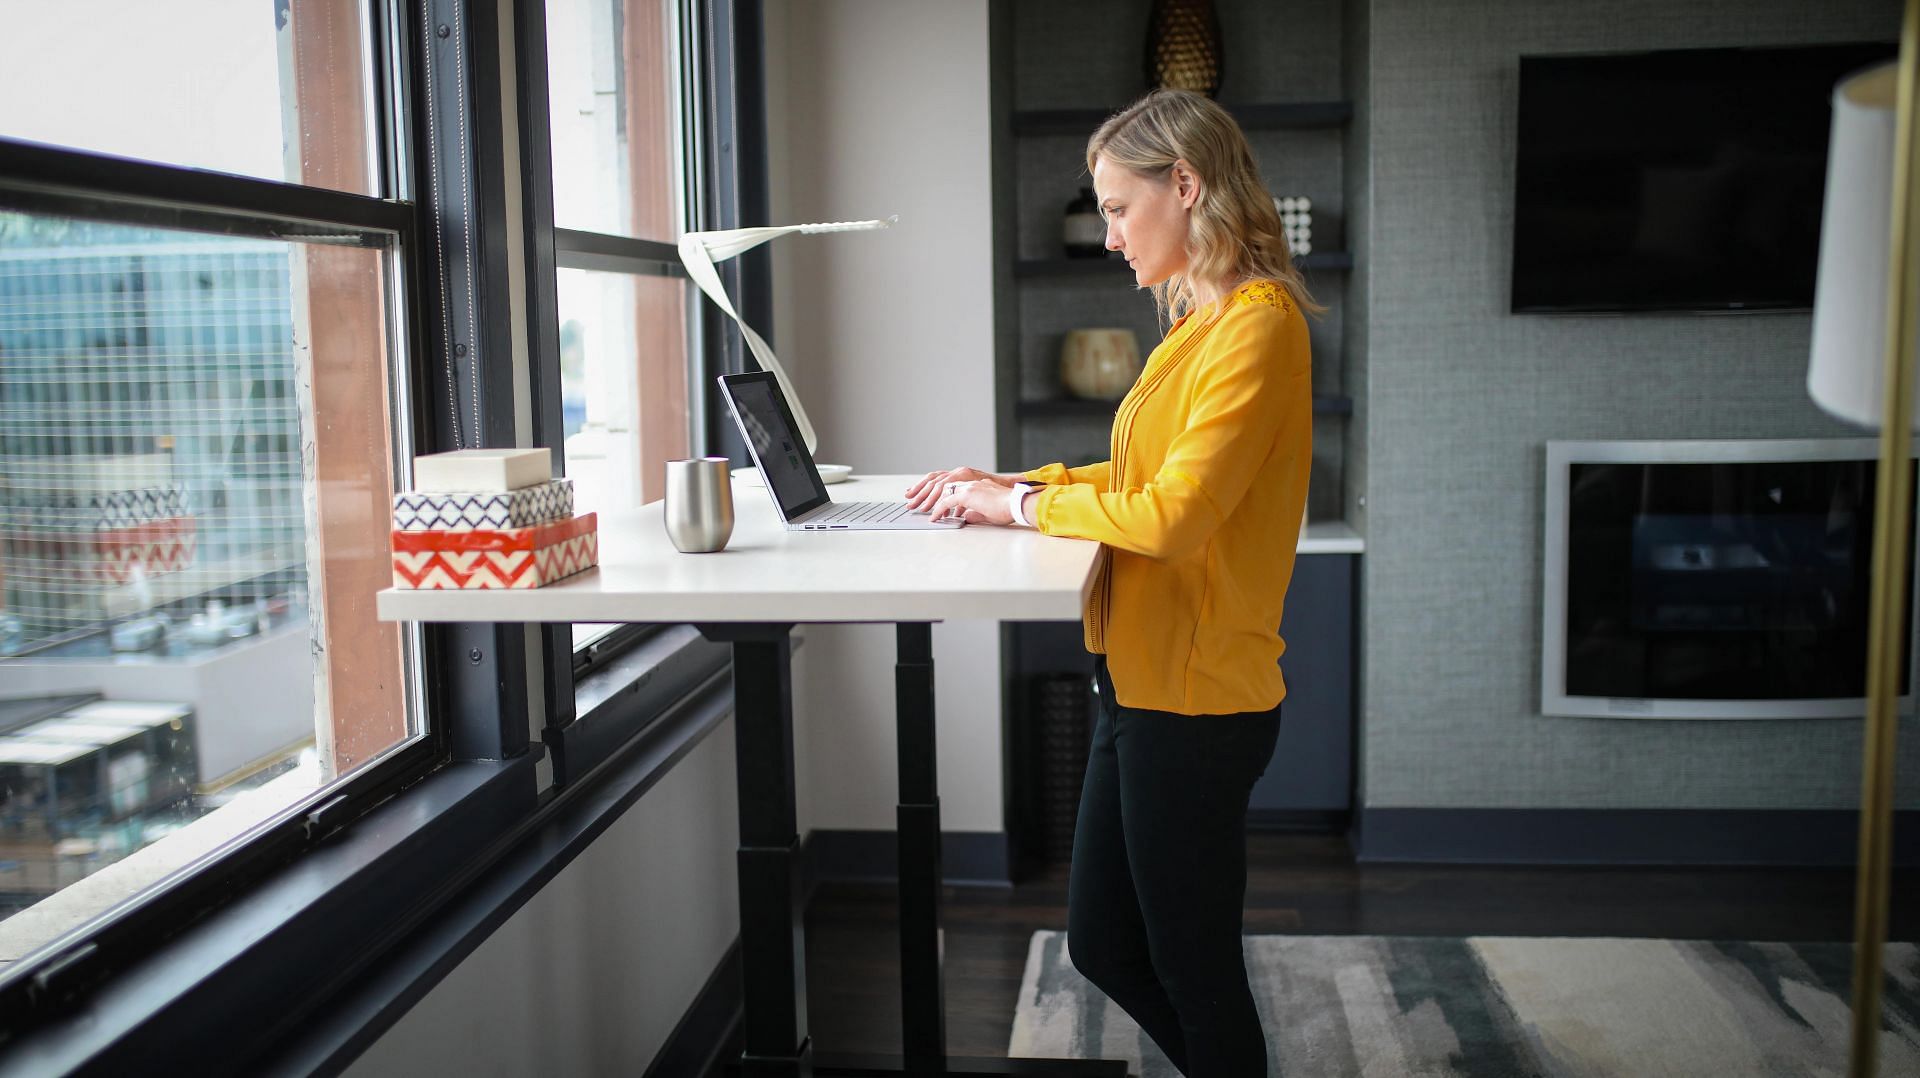 New way of working out in 2022 with standing desk treadmill (Image courtesy-Pexels)